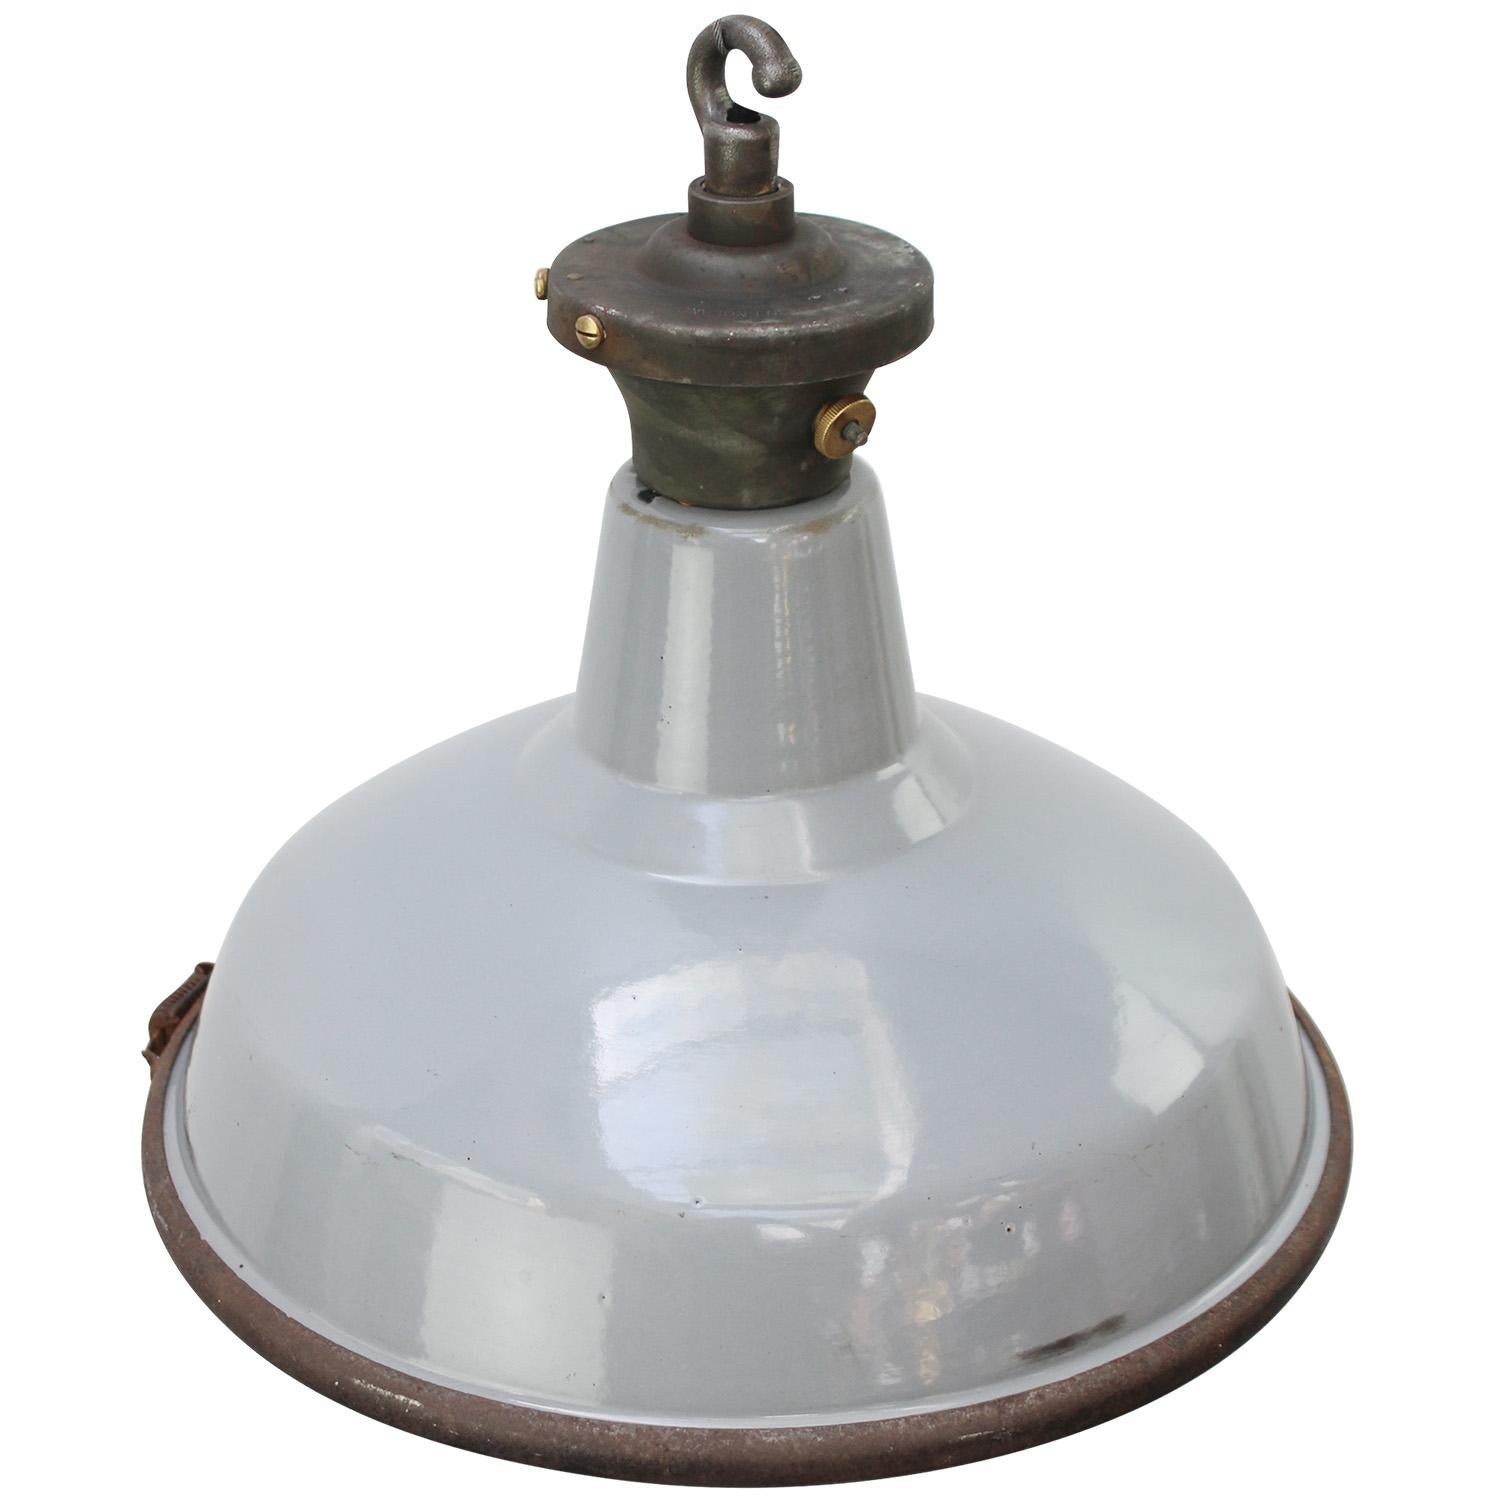 English vintage industrial classic
Gray enamel, white interior and rounded clear glass

Weight: 2.60 kg / 5.7 lb

Priced per individual item. All lamps have been made suitable by international standards for incandescent light bulbs, energy-efficient